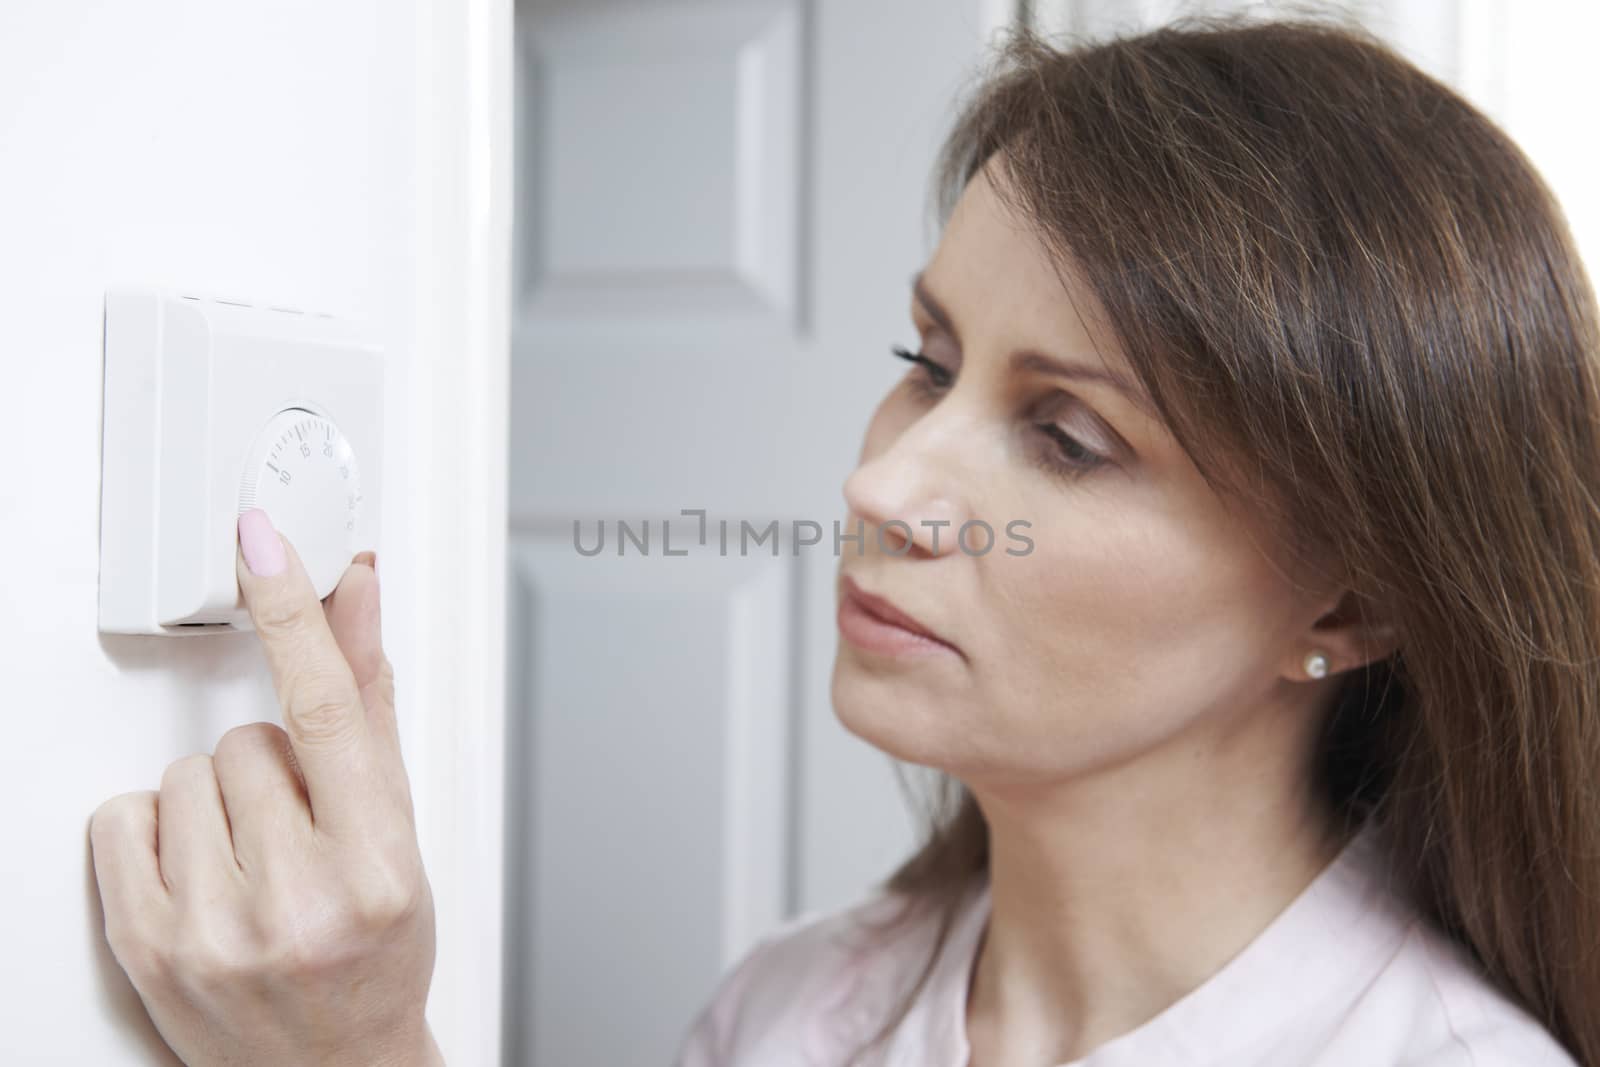 Woman Adjusting Thermostat On Central Heating Control